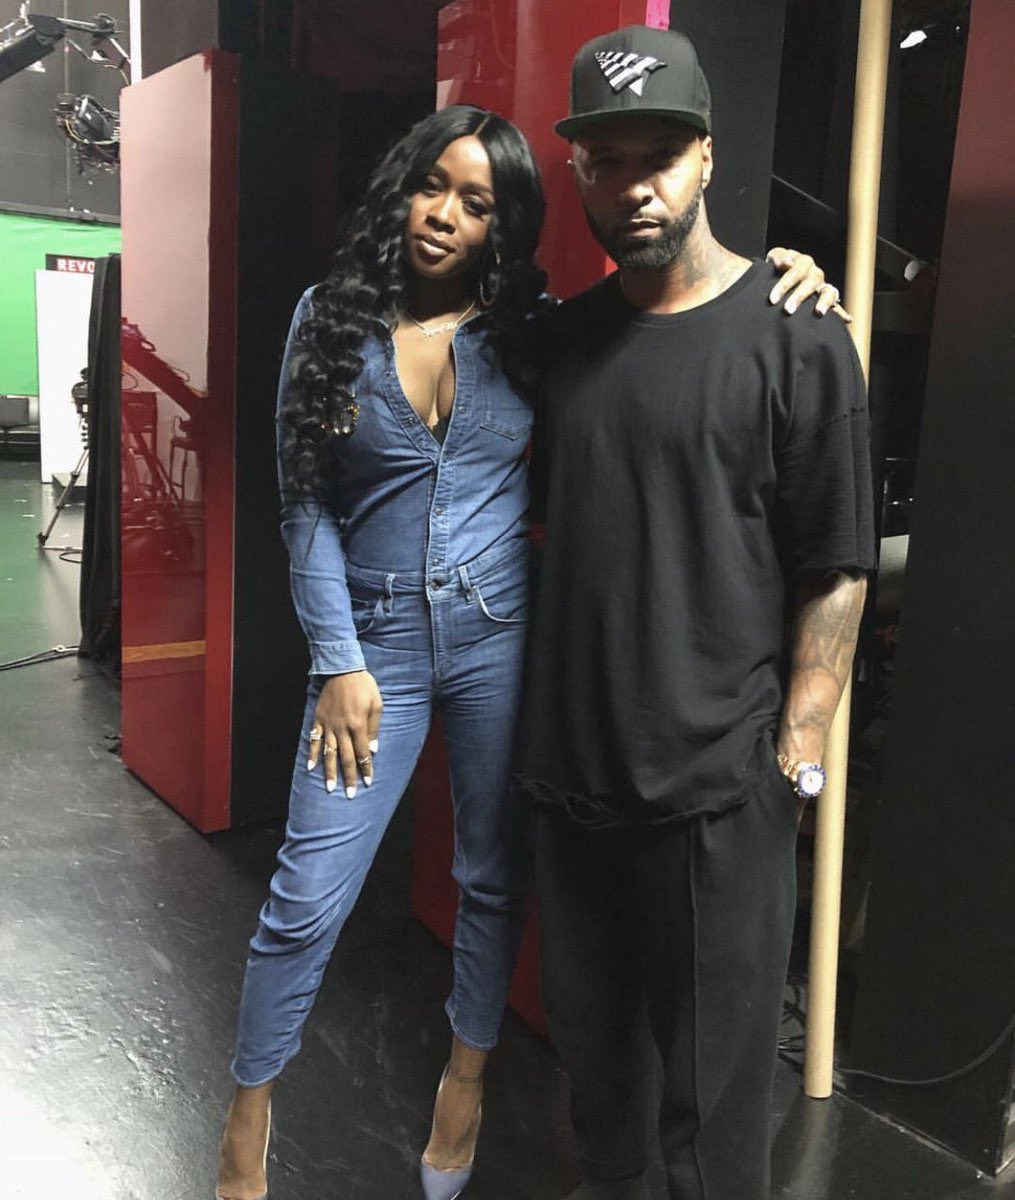 2018: September - Remy Ma joins Joe Budden on his show “State of the Culture” as a permanent cohost and appear on her 4th season of Love & Hip Hop: NY.